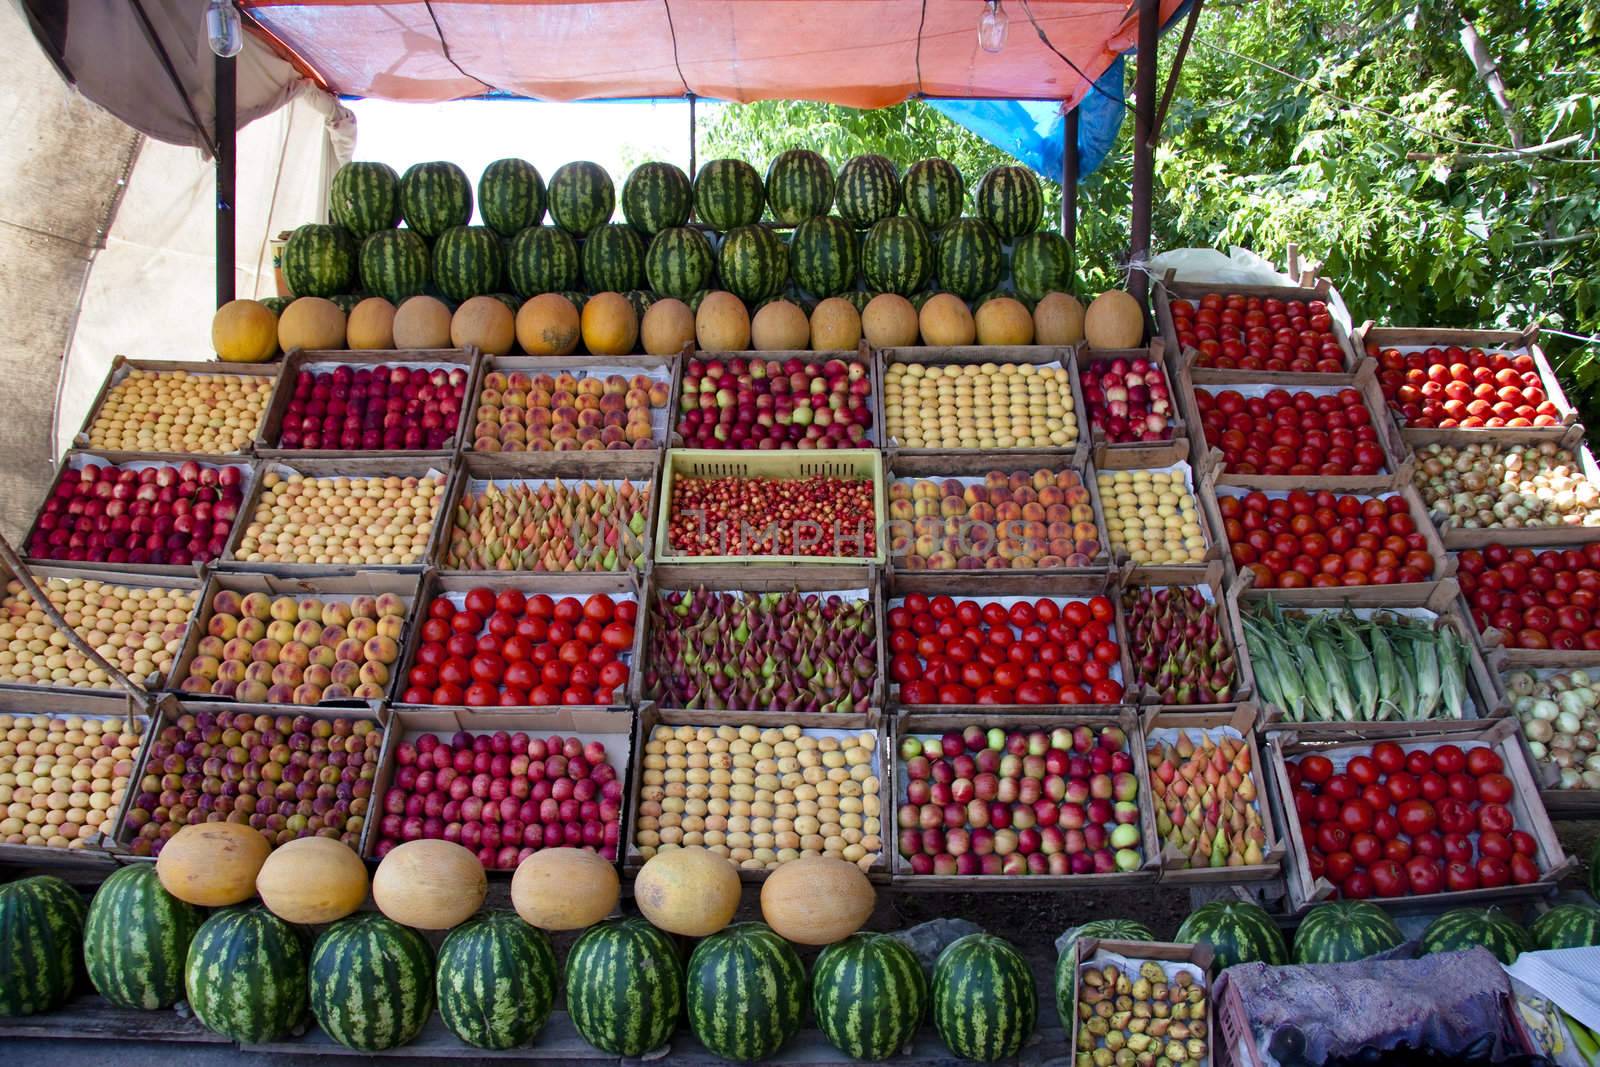 Fruit on the stall in market in Armenia. Colorful view